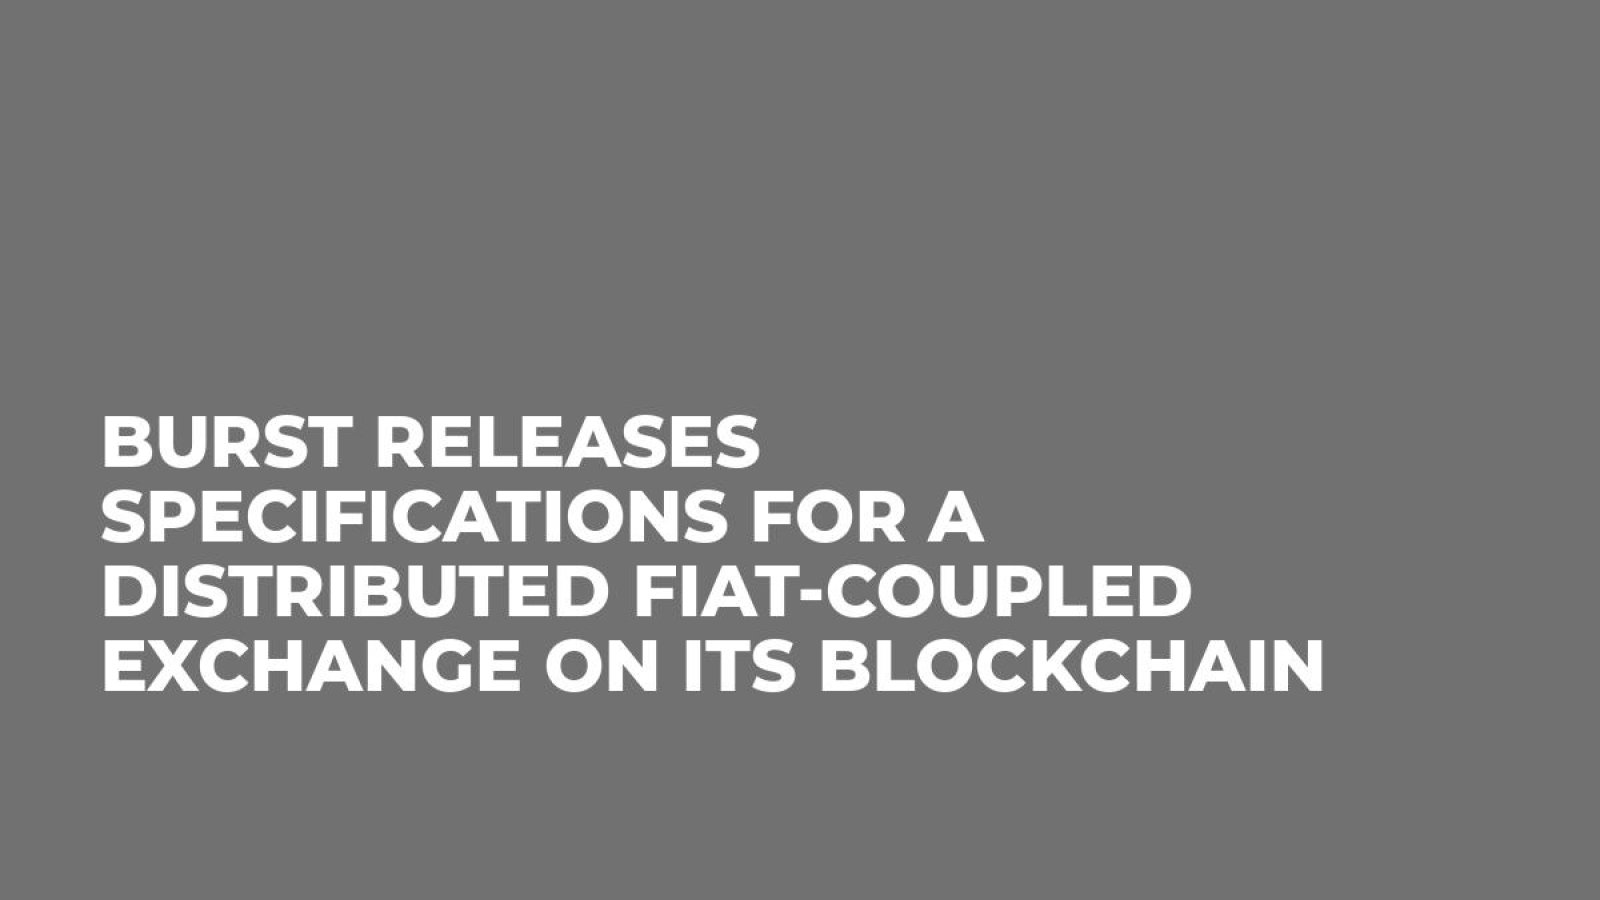 BURST releases specifications for a distributed fiat-coupled exchange on its blockchain 